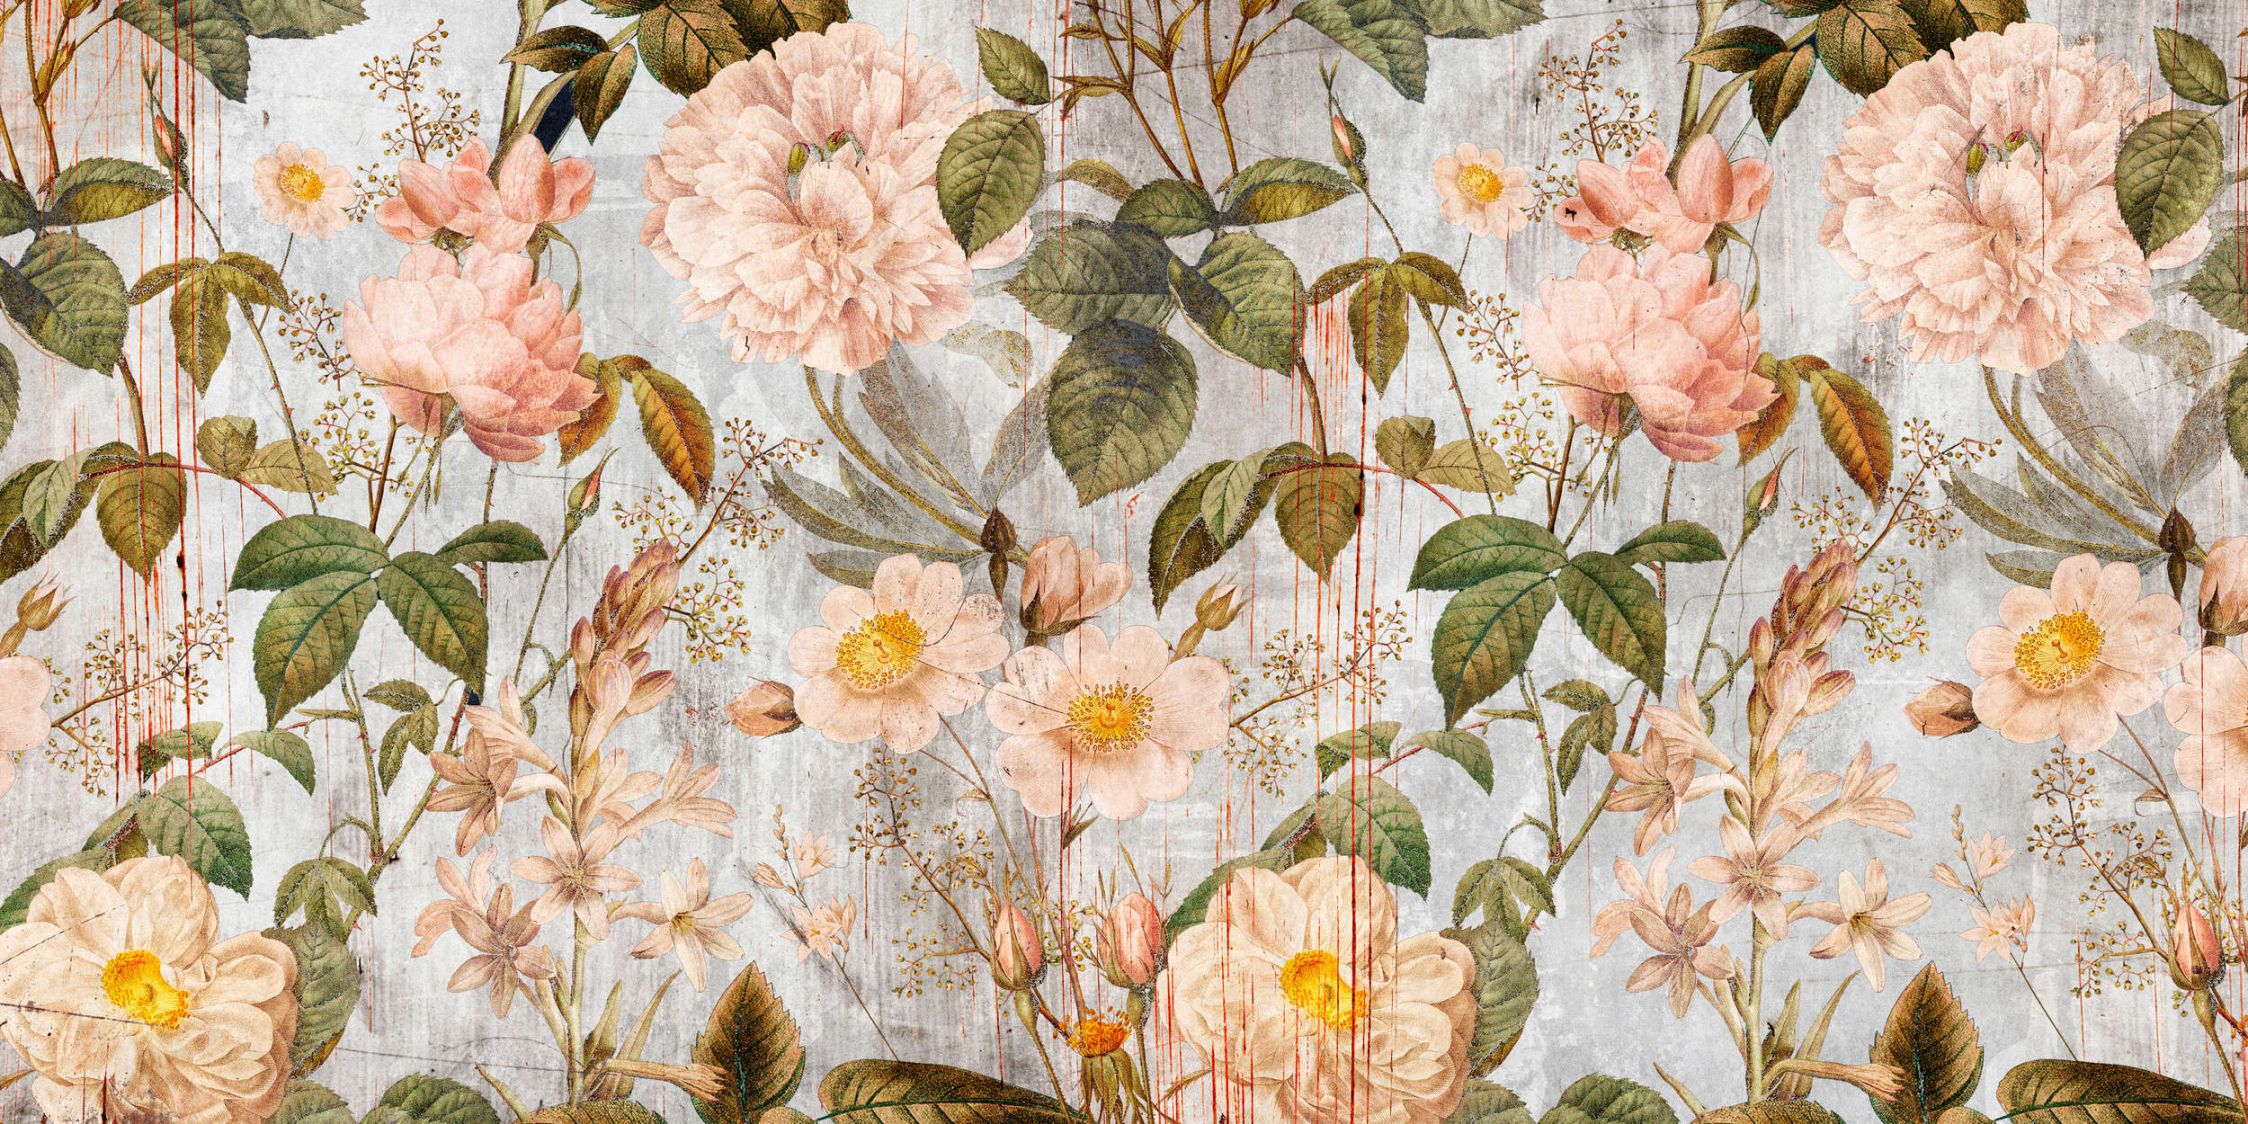             Photo wallpaper »rose« - Vintage style floral pattern - Matt, smooth non-woven fabric
        